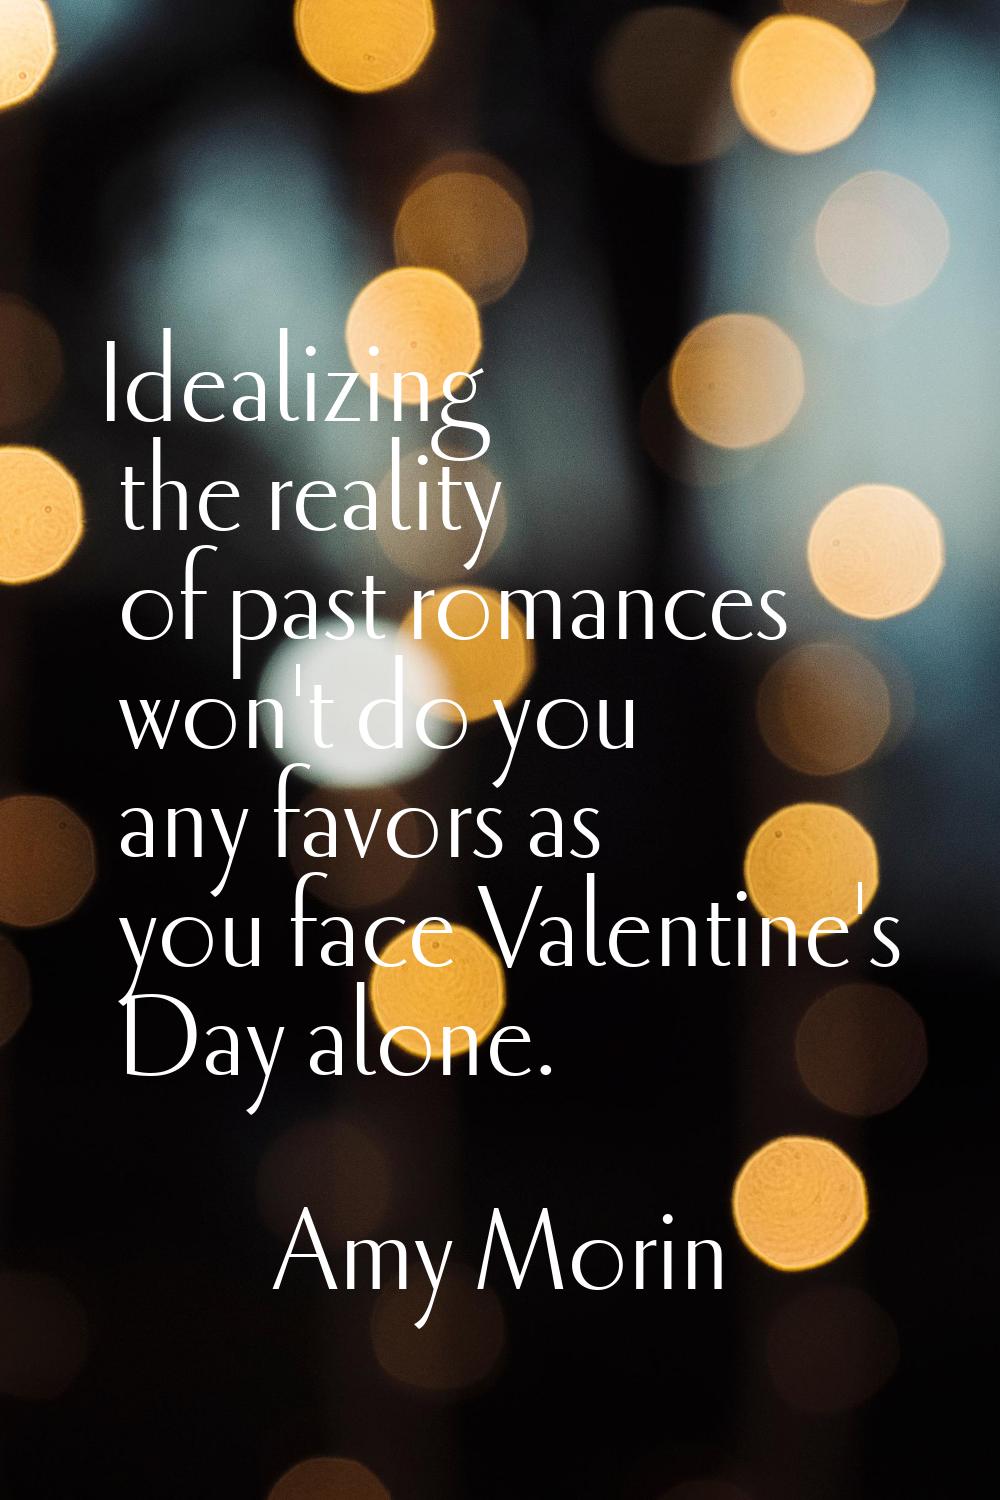 Idealizing the reality of past romances won't do you any favors as you face Valentine's Day alone.